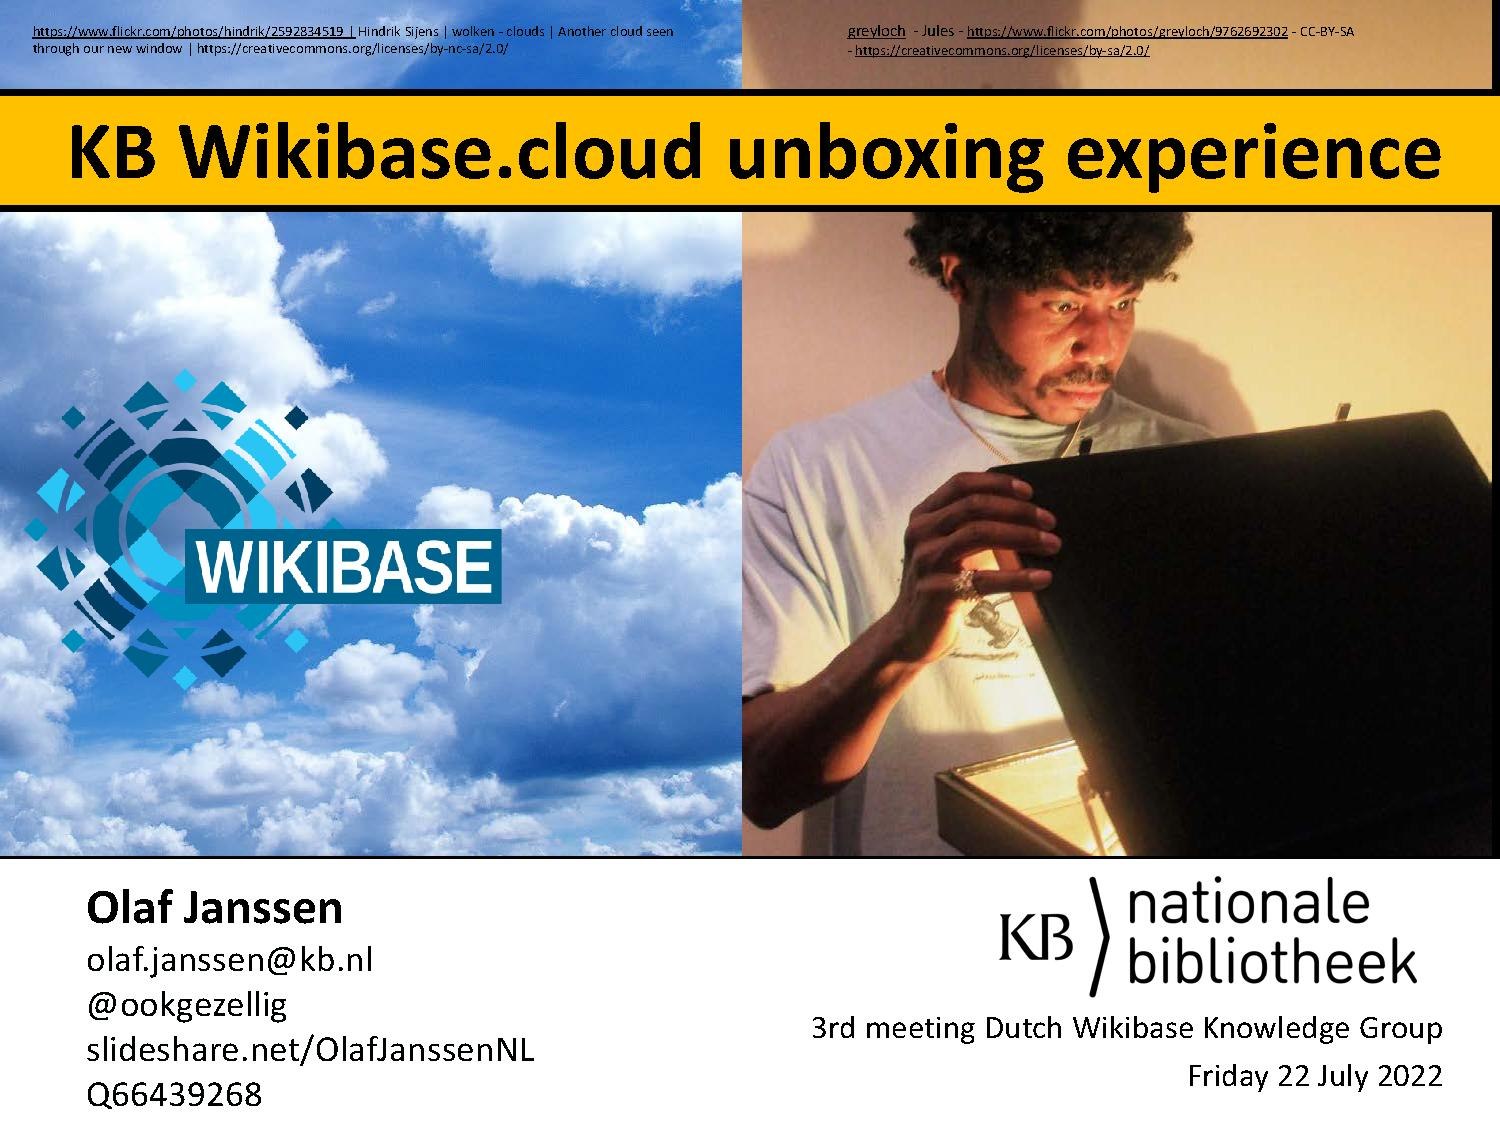 File:KB Wikibase.cloud Unboxing Experience, Netherlands Wikibase Knowlegde  Group, 22-07-2022.pdf - Wikimedia Commons